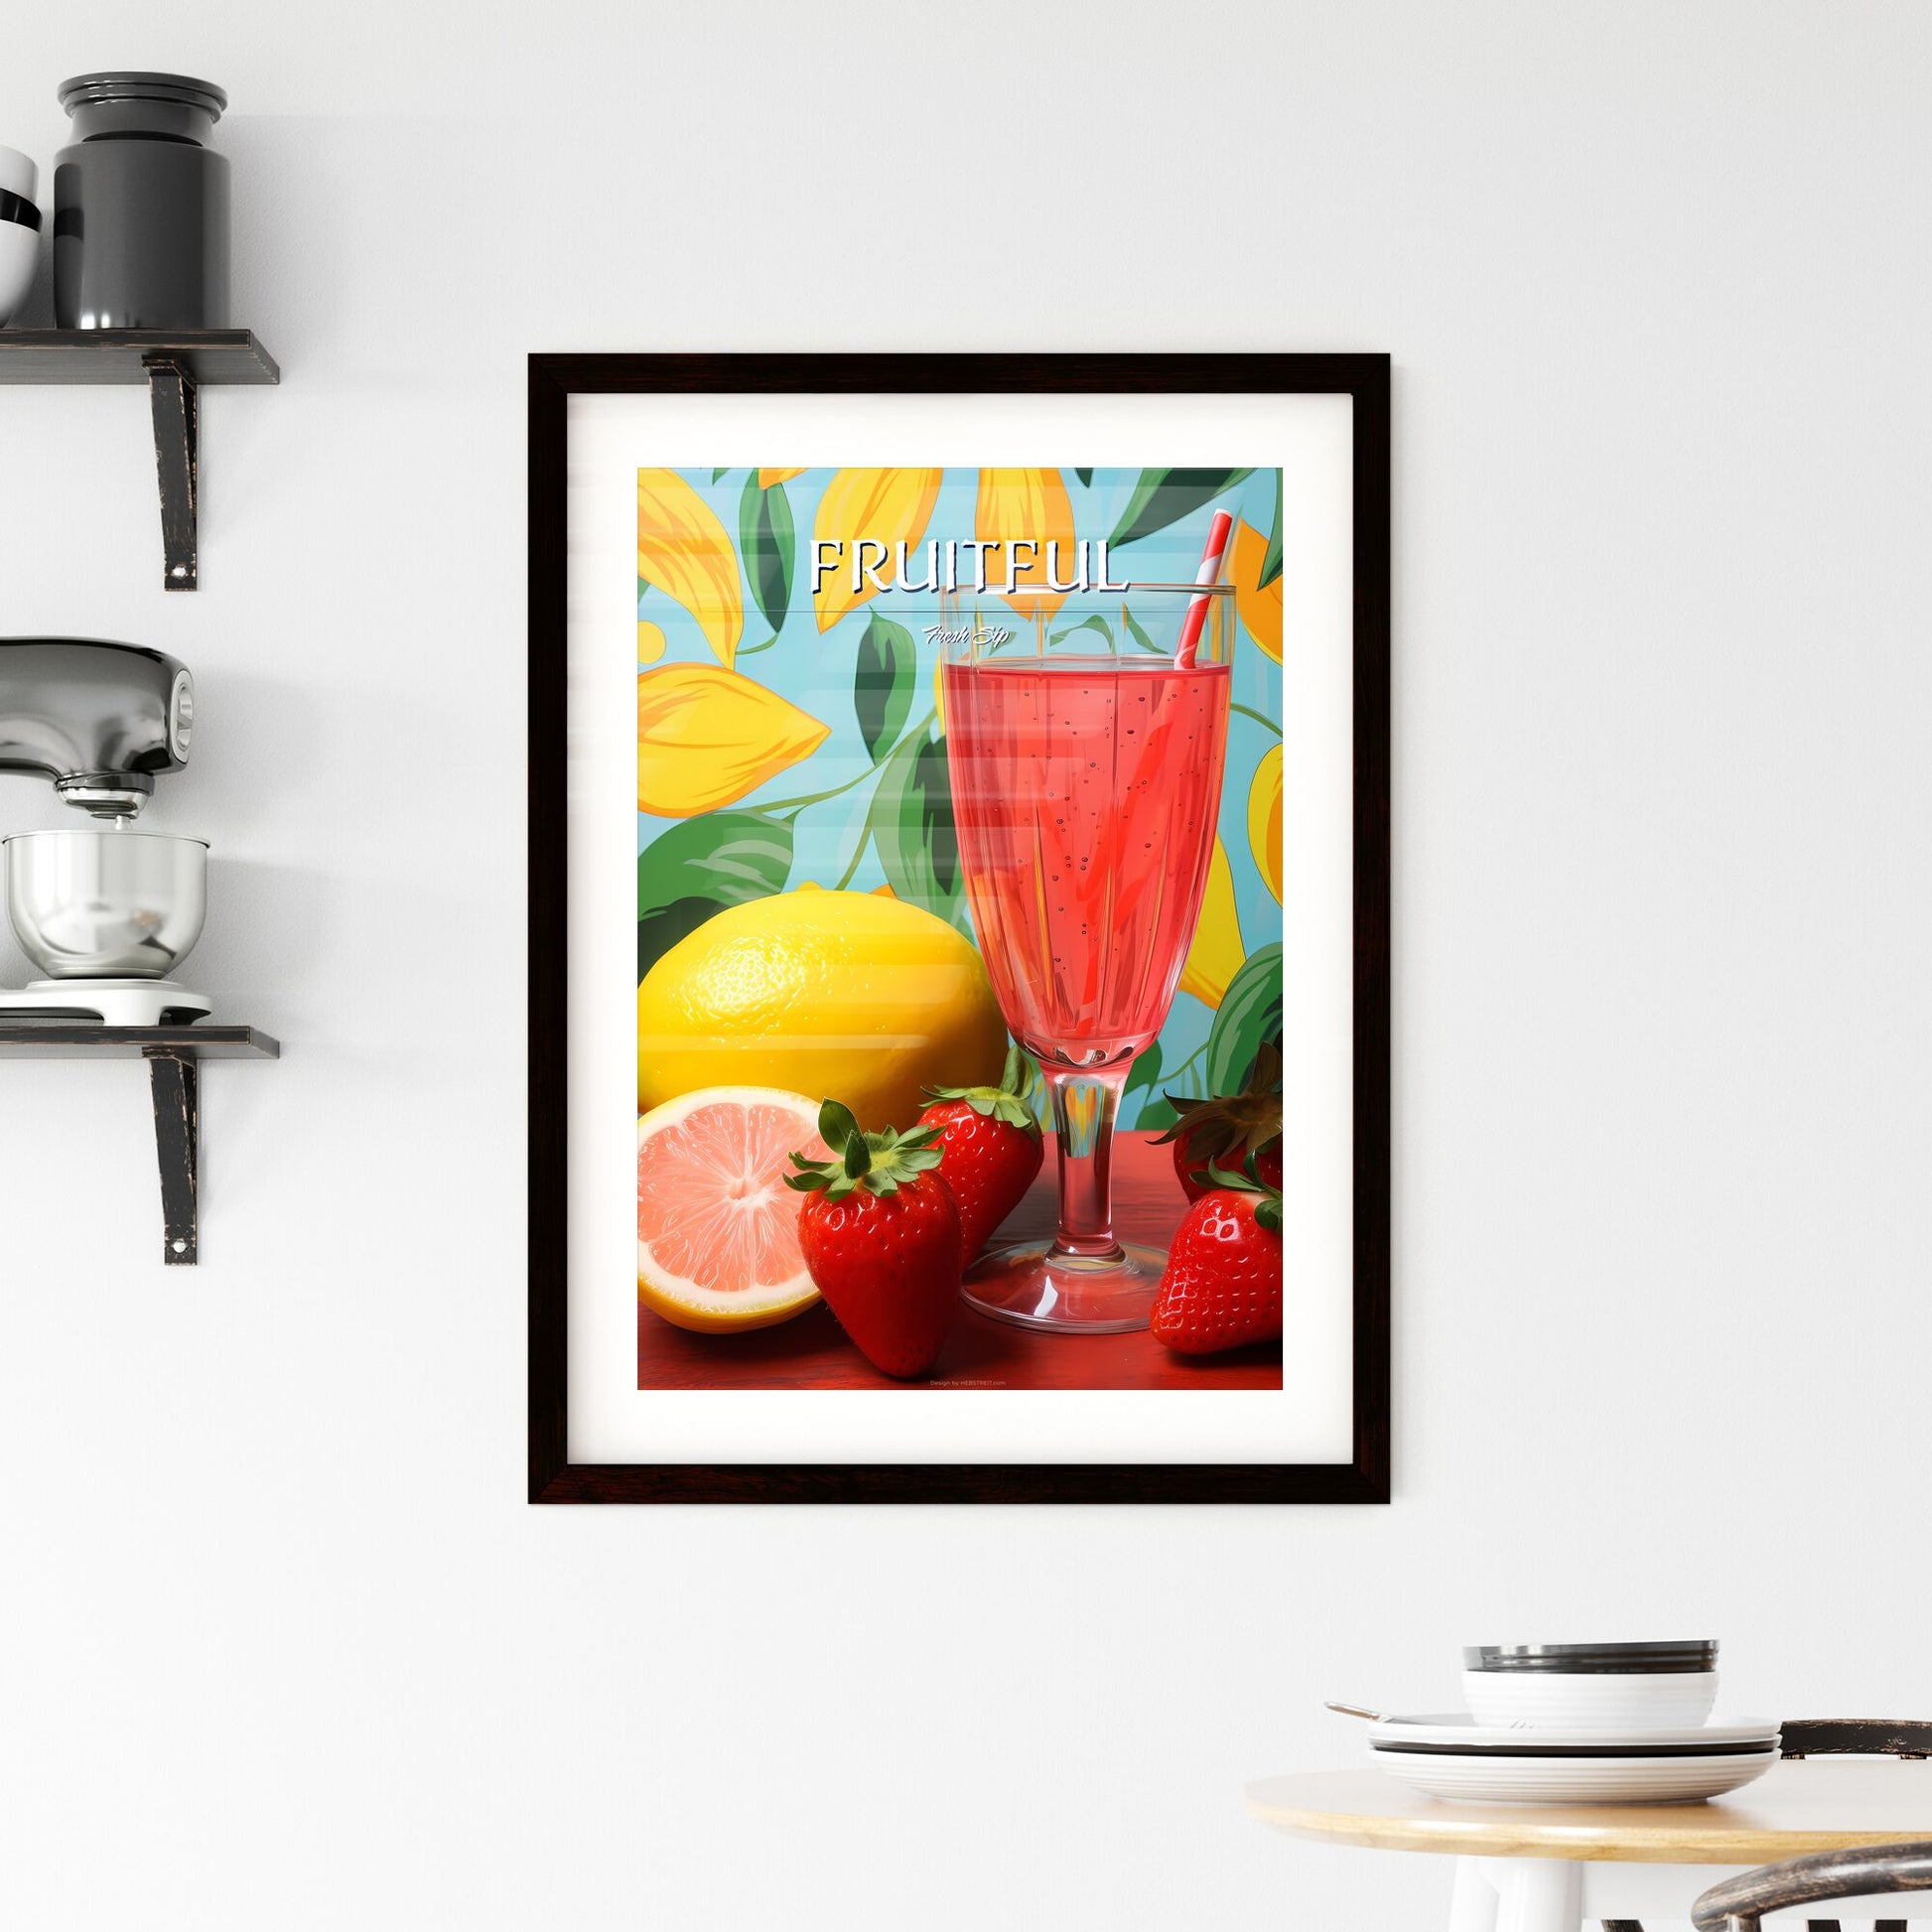 Glass Of Pink Drink With Straw Next To Strawberries And Lemons Art Print Default Title